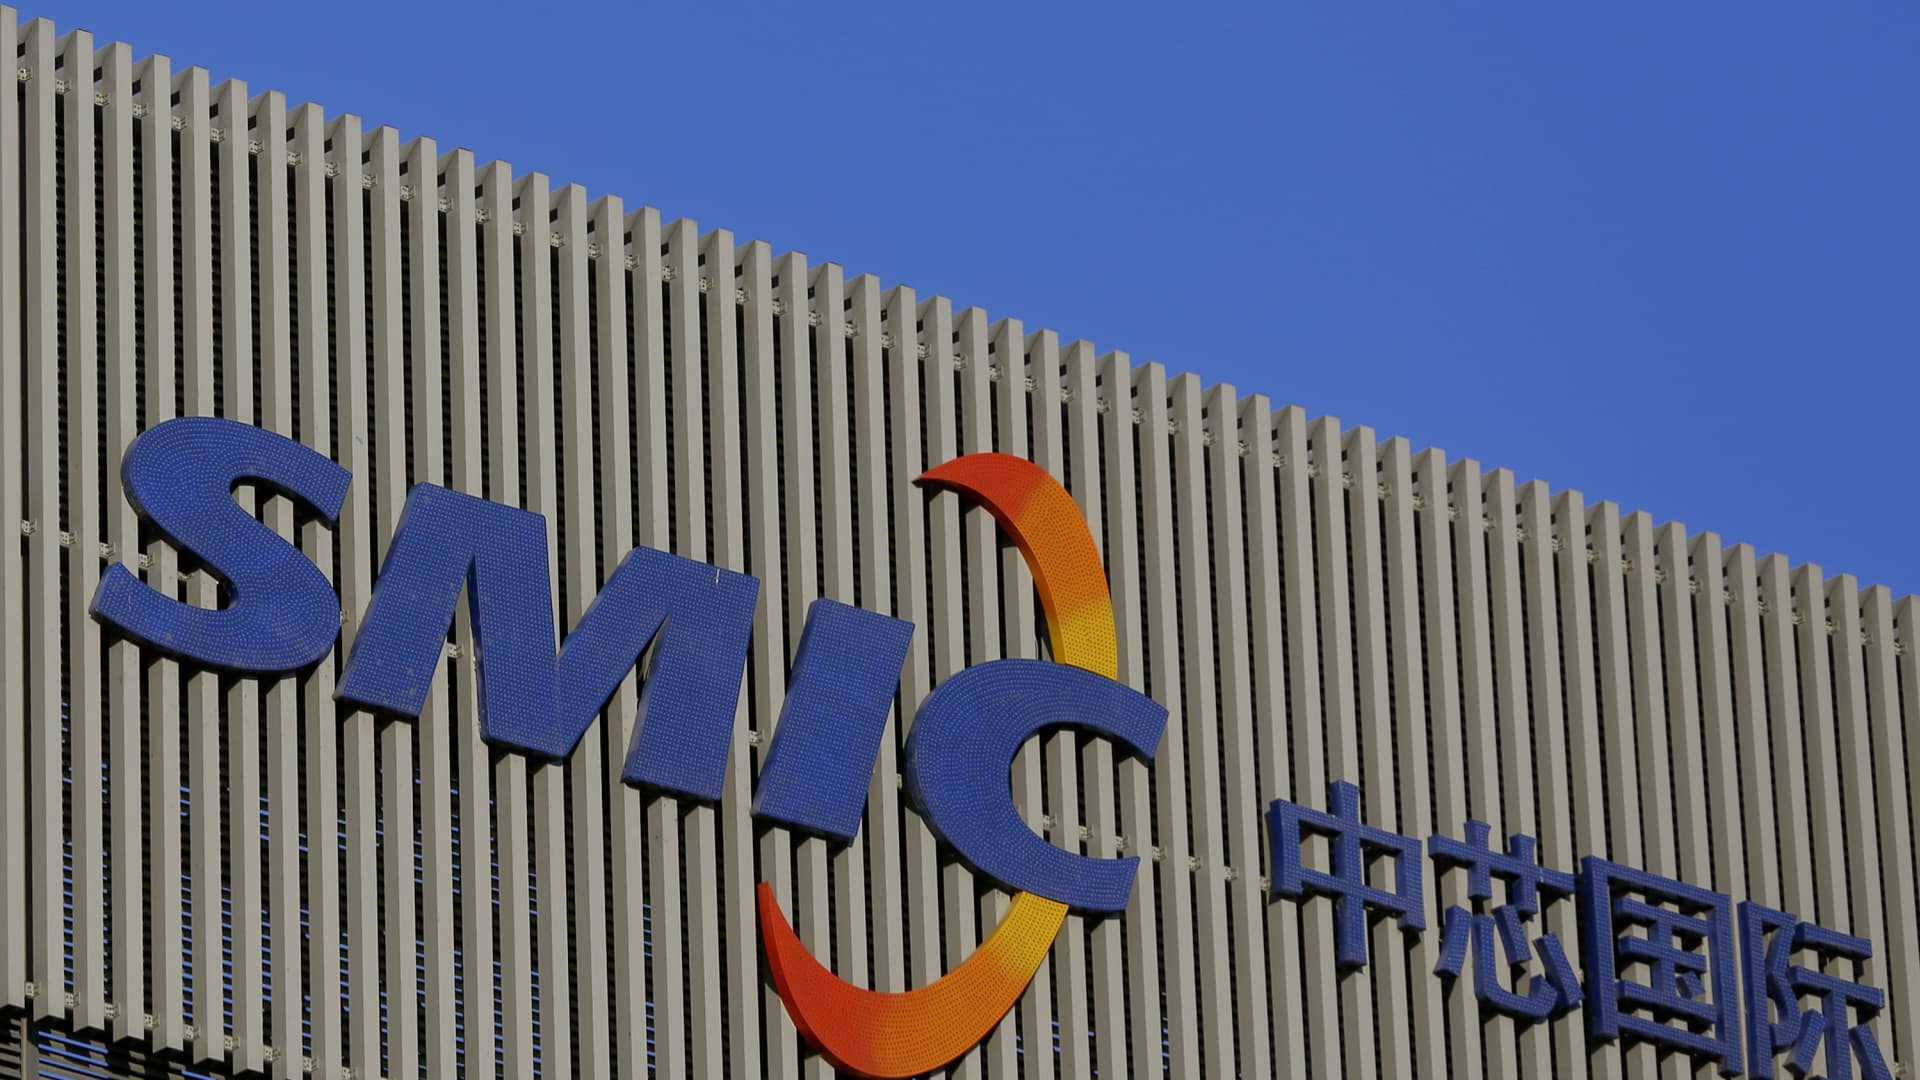 SMIC posted a drop in second-quarter revenue on persisting weak chip demand